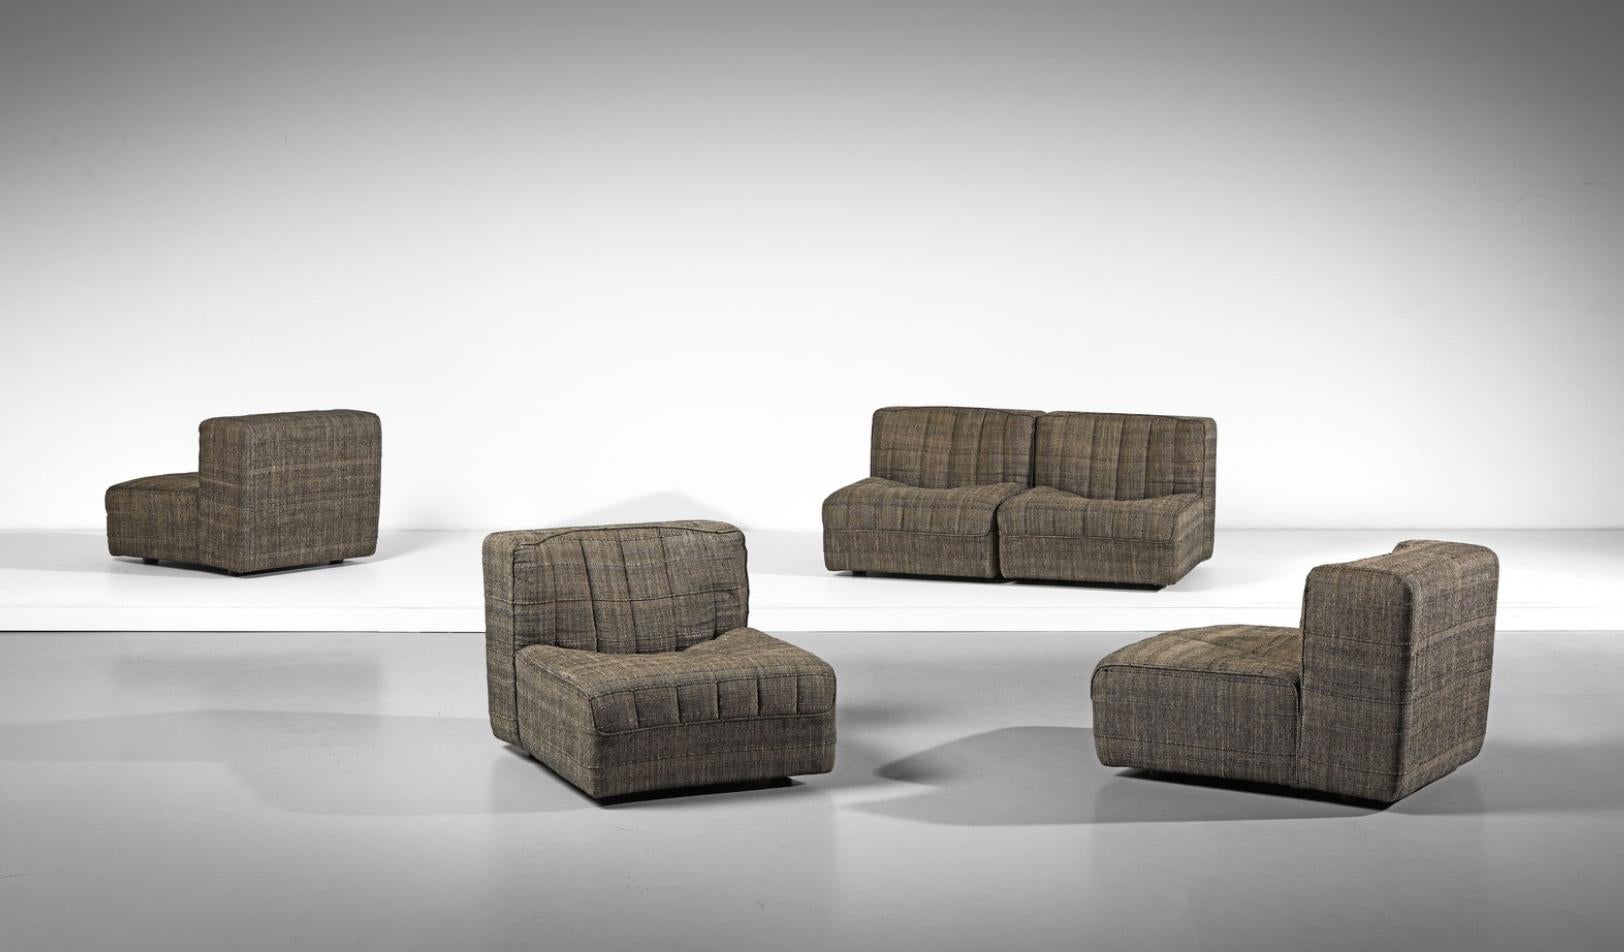 Rare modular sofa made by Italian designer Tito Agnoli (1931 - 2012) for Arflex.
The set includes five single identical pieces which may be combined in different ways. Original condition with no restaurations. 
Manufacturing label,